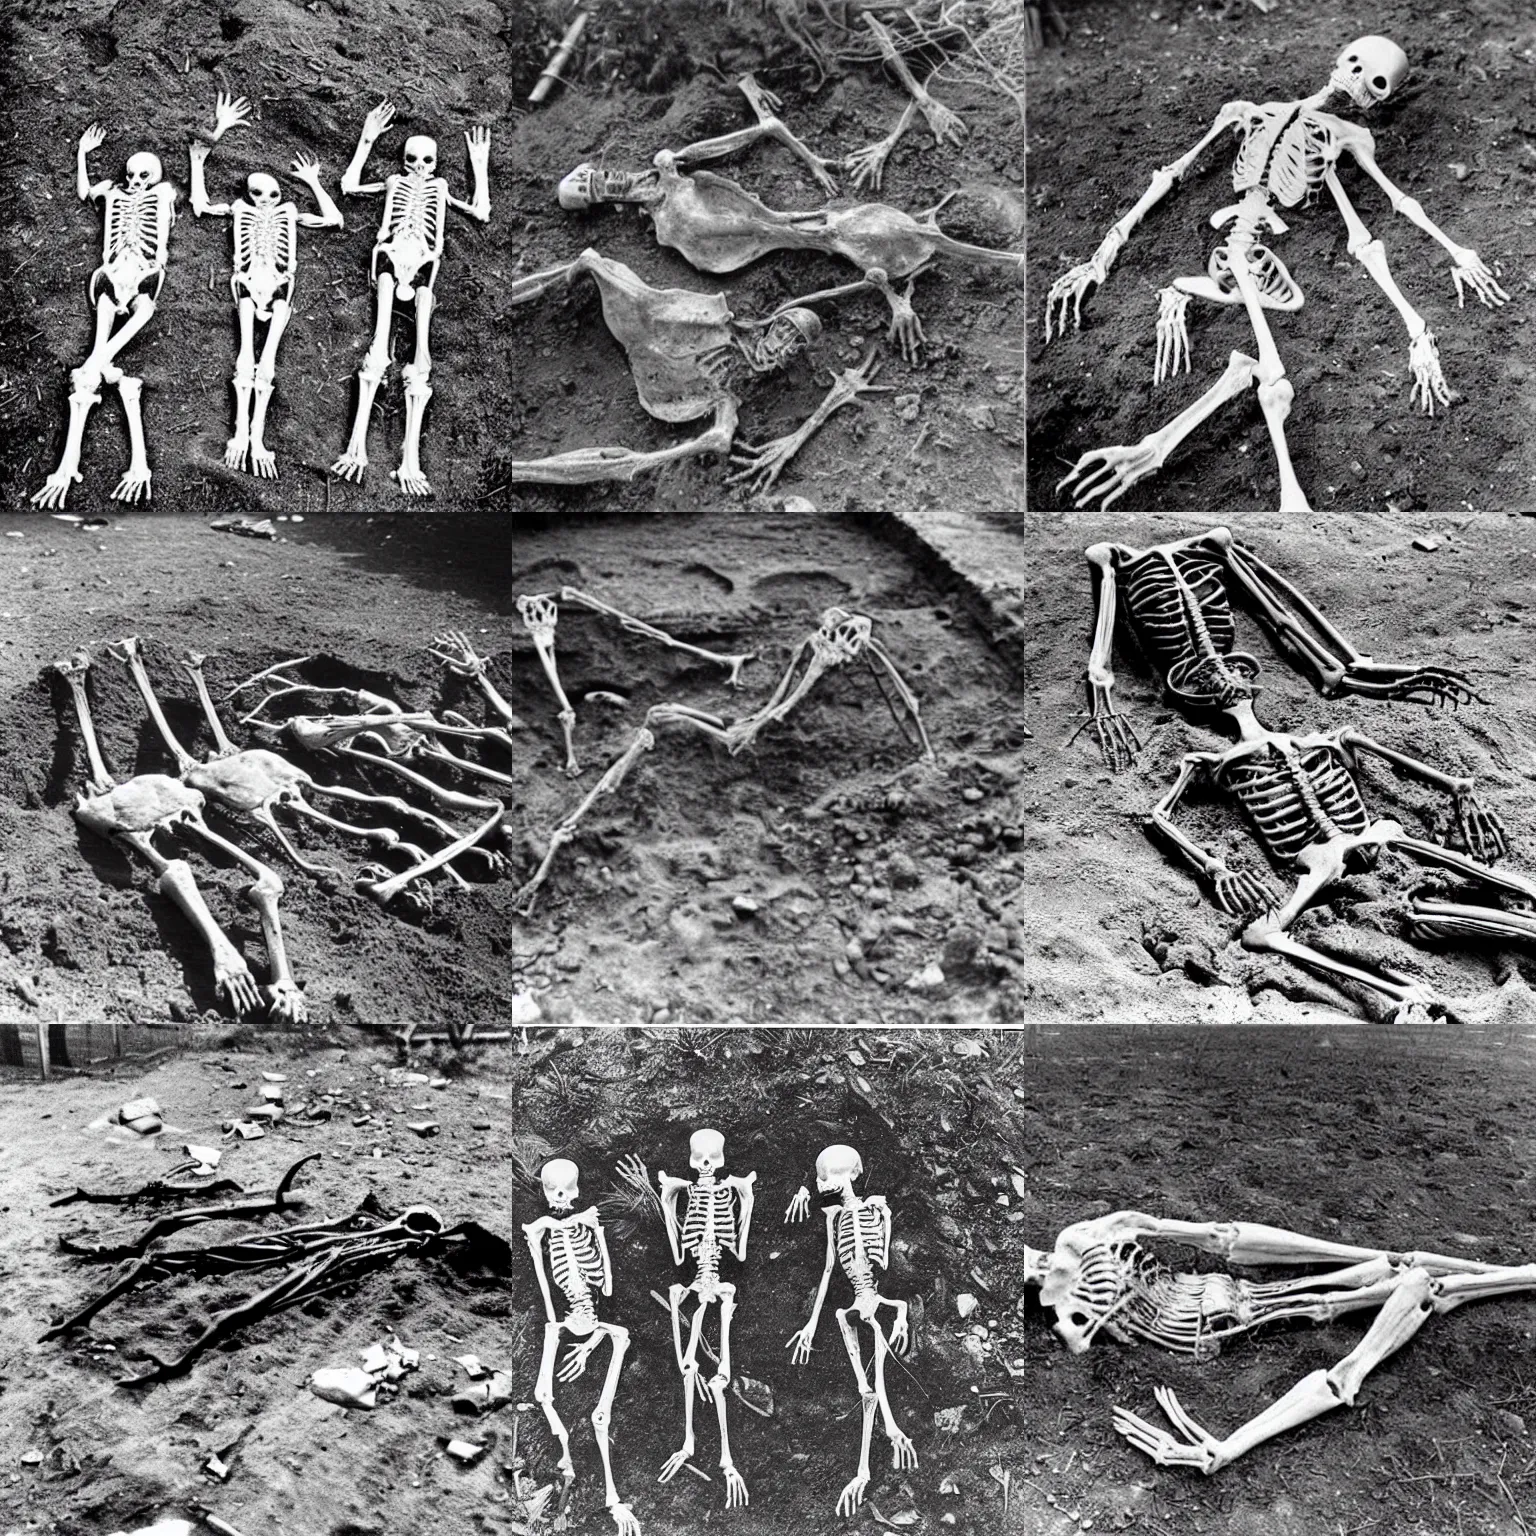 Prompt: 1960s photographic evidence of remains of an alien skeletons partially buried in the ground